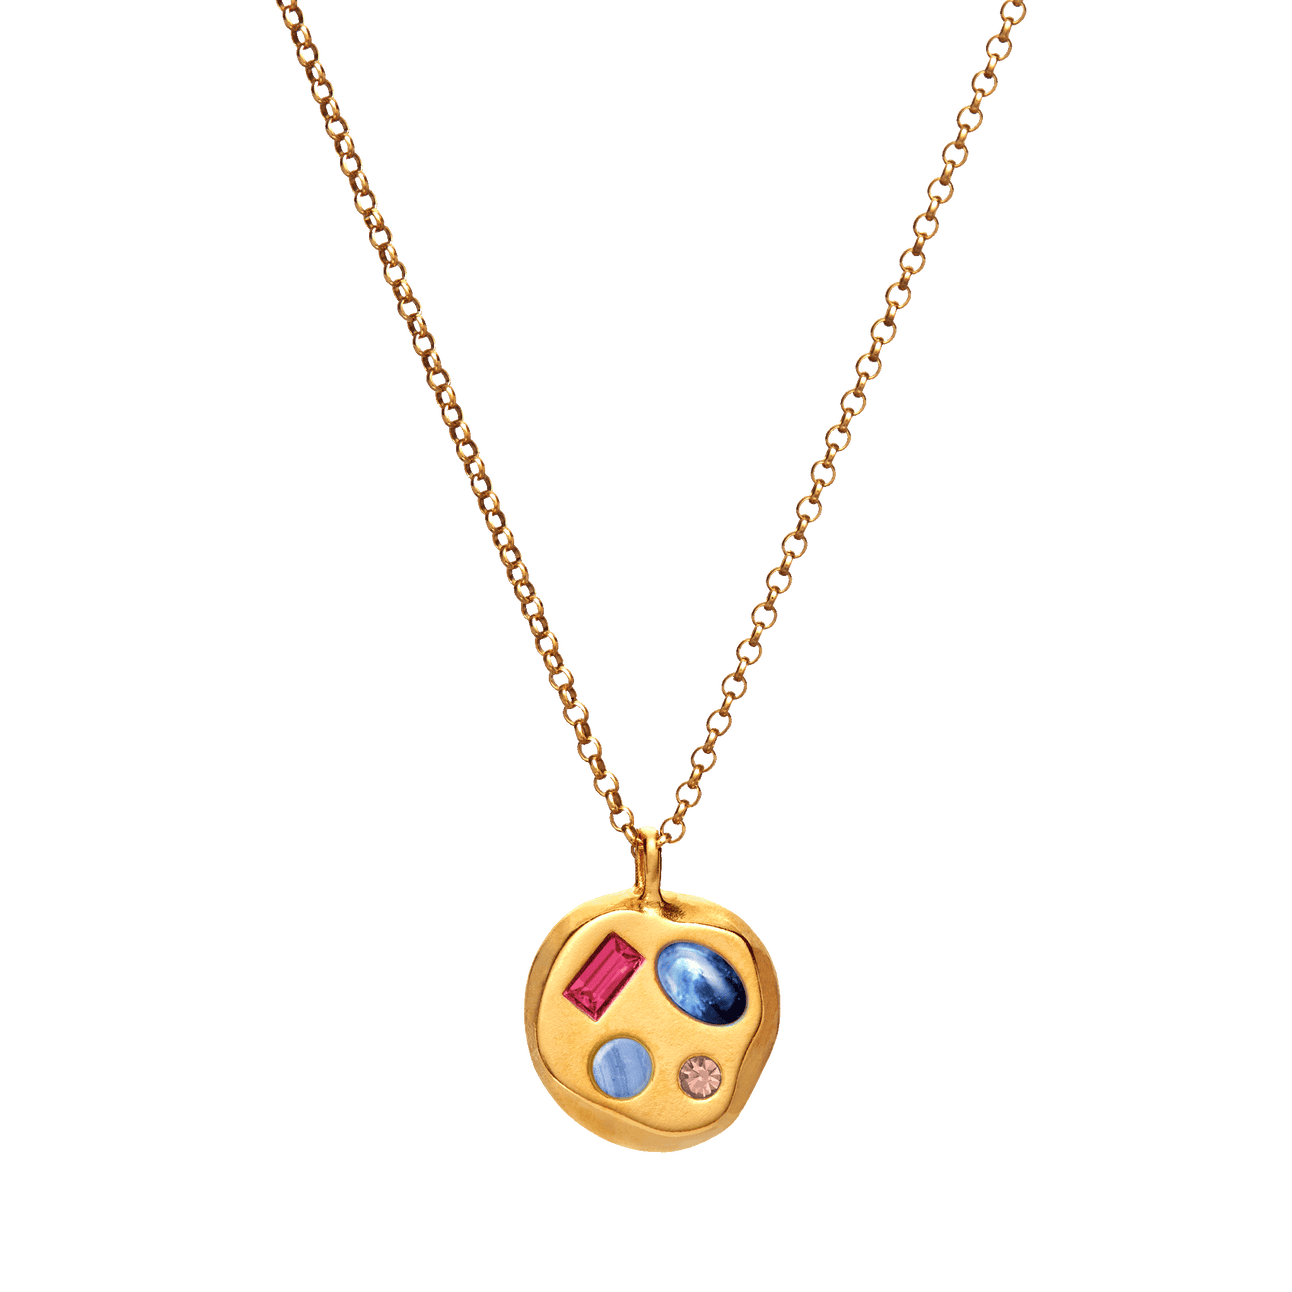 The July Fourth Pendant